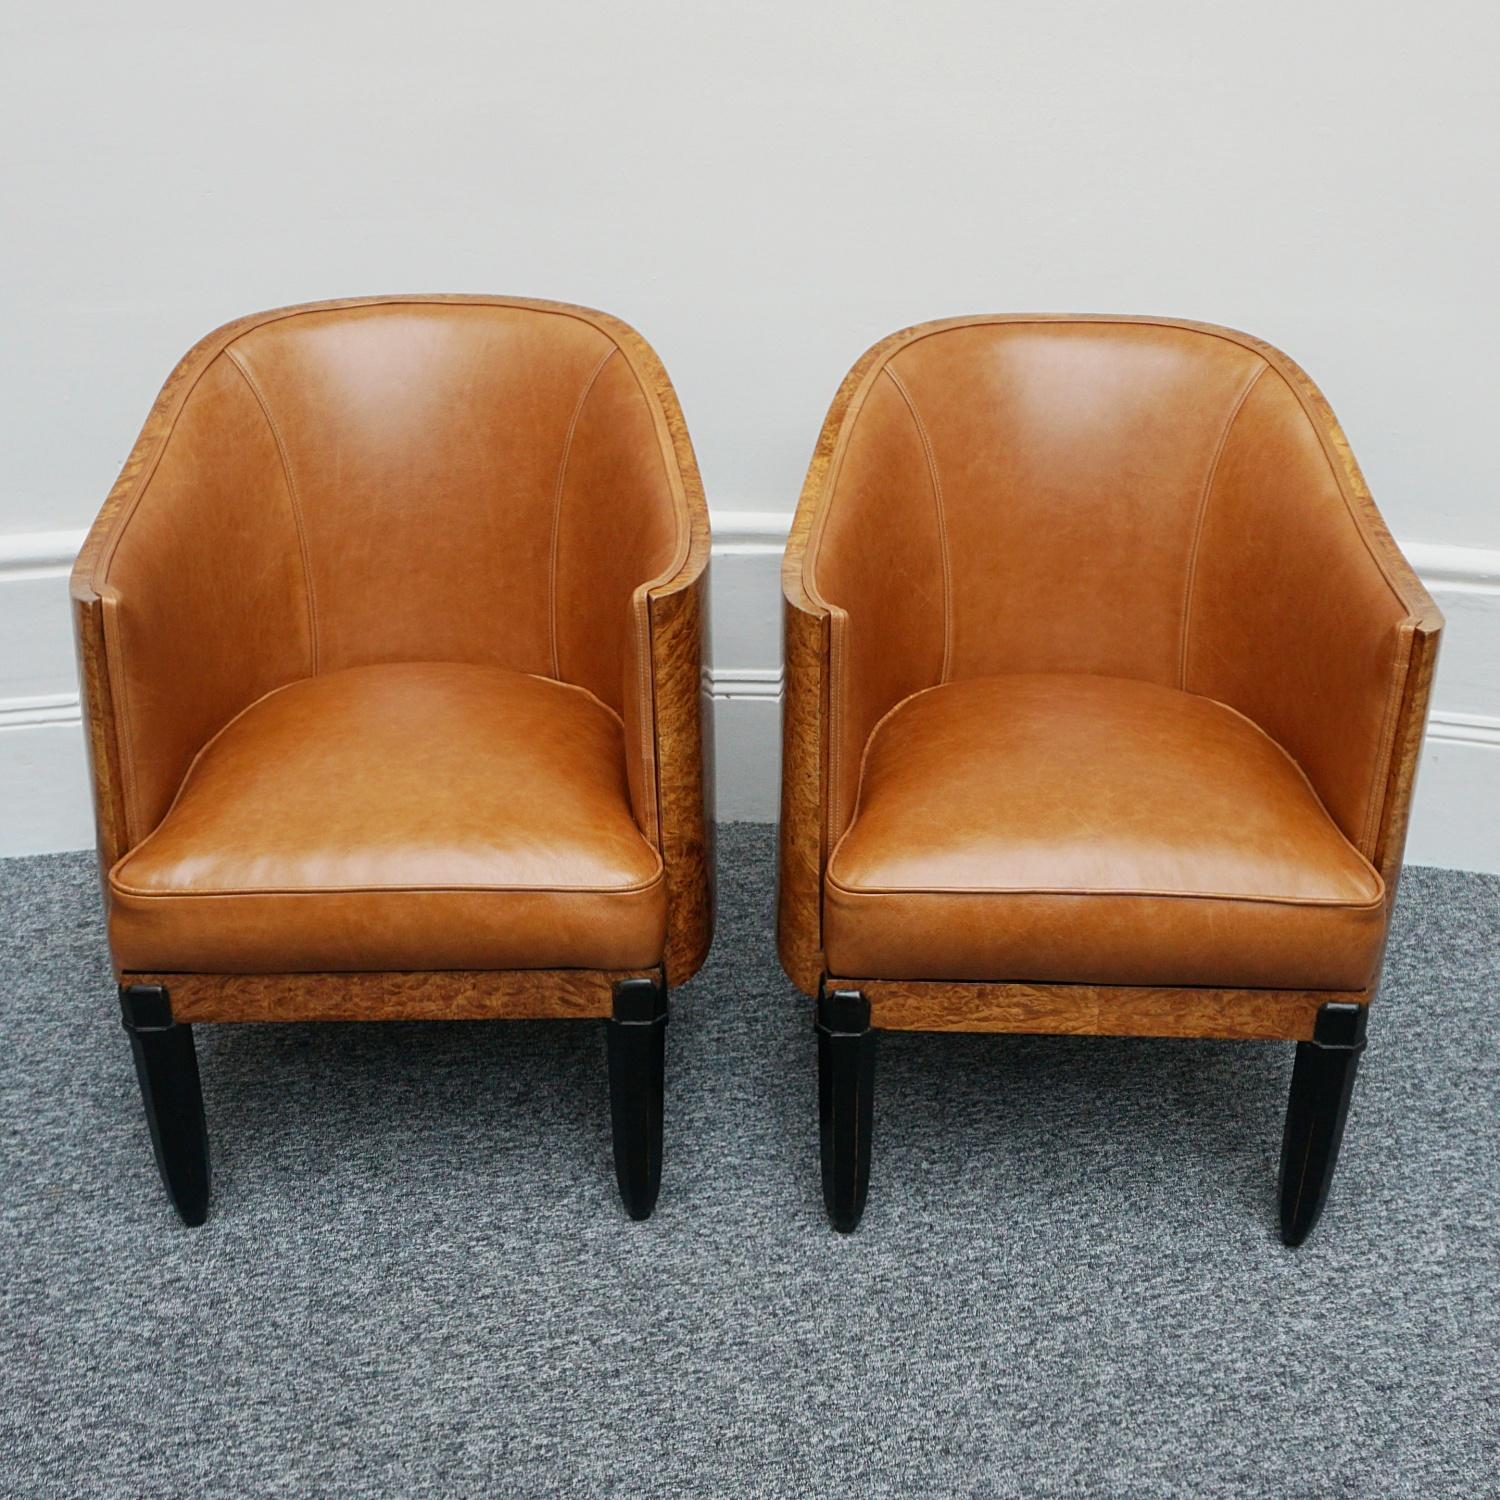 Original Pair of Walnut and Leather Art Deco Club Chairs  7